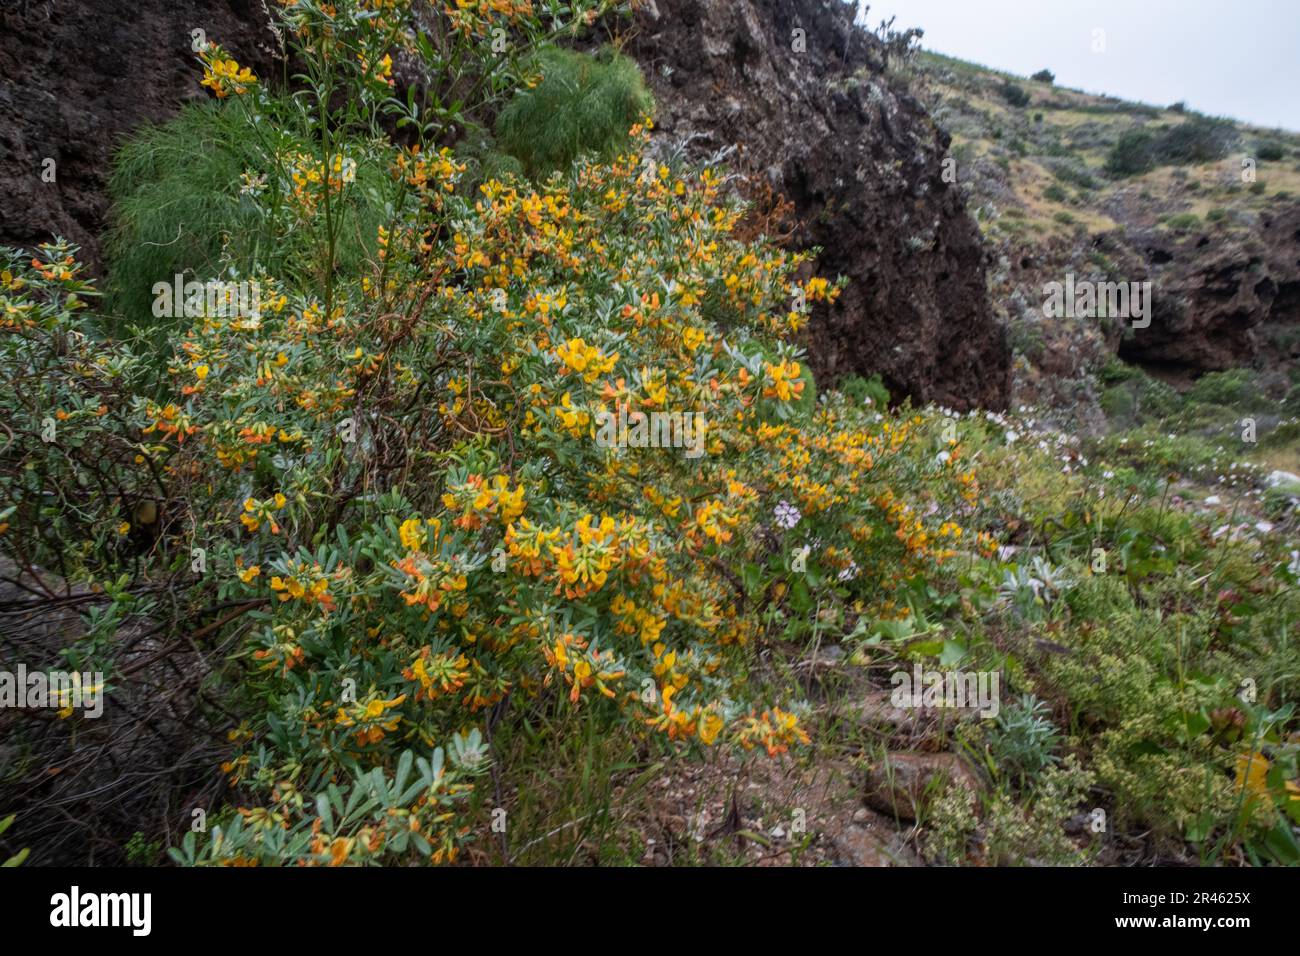 Island Broom, Acmispon dendroideus, a rare plant endemic to the channel island National Park in California. Stock Photo